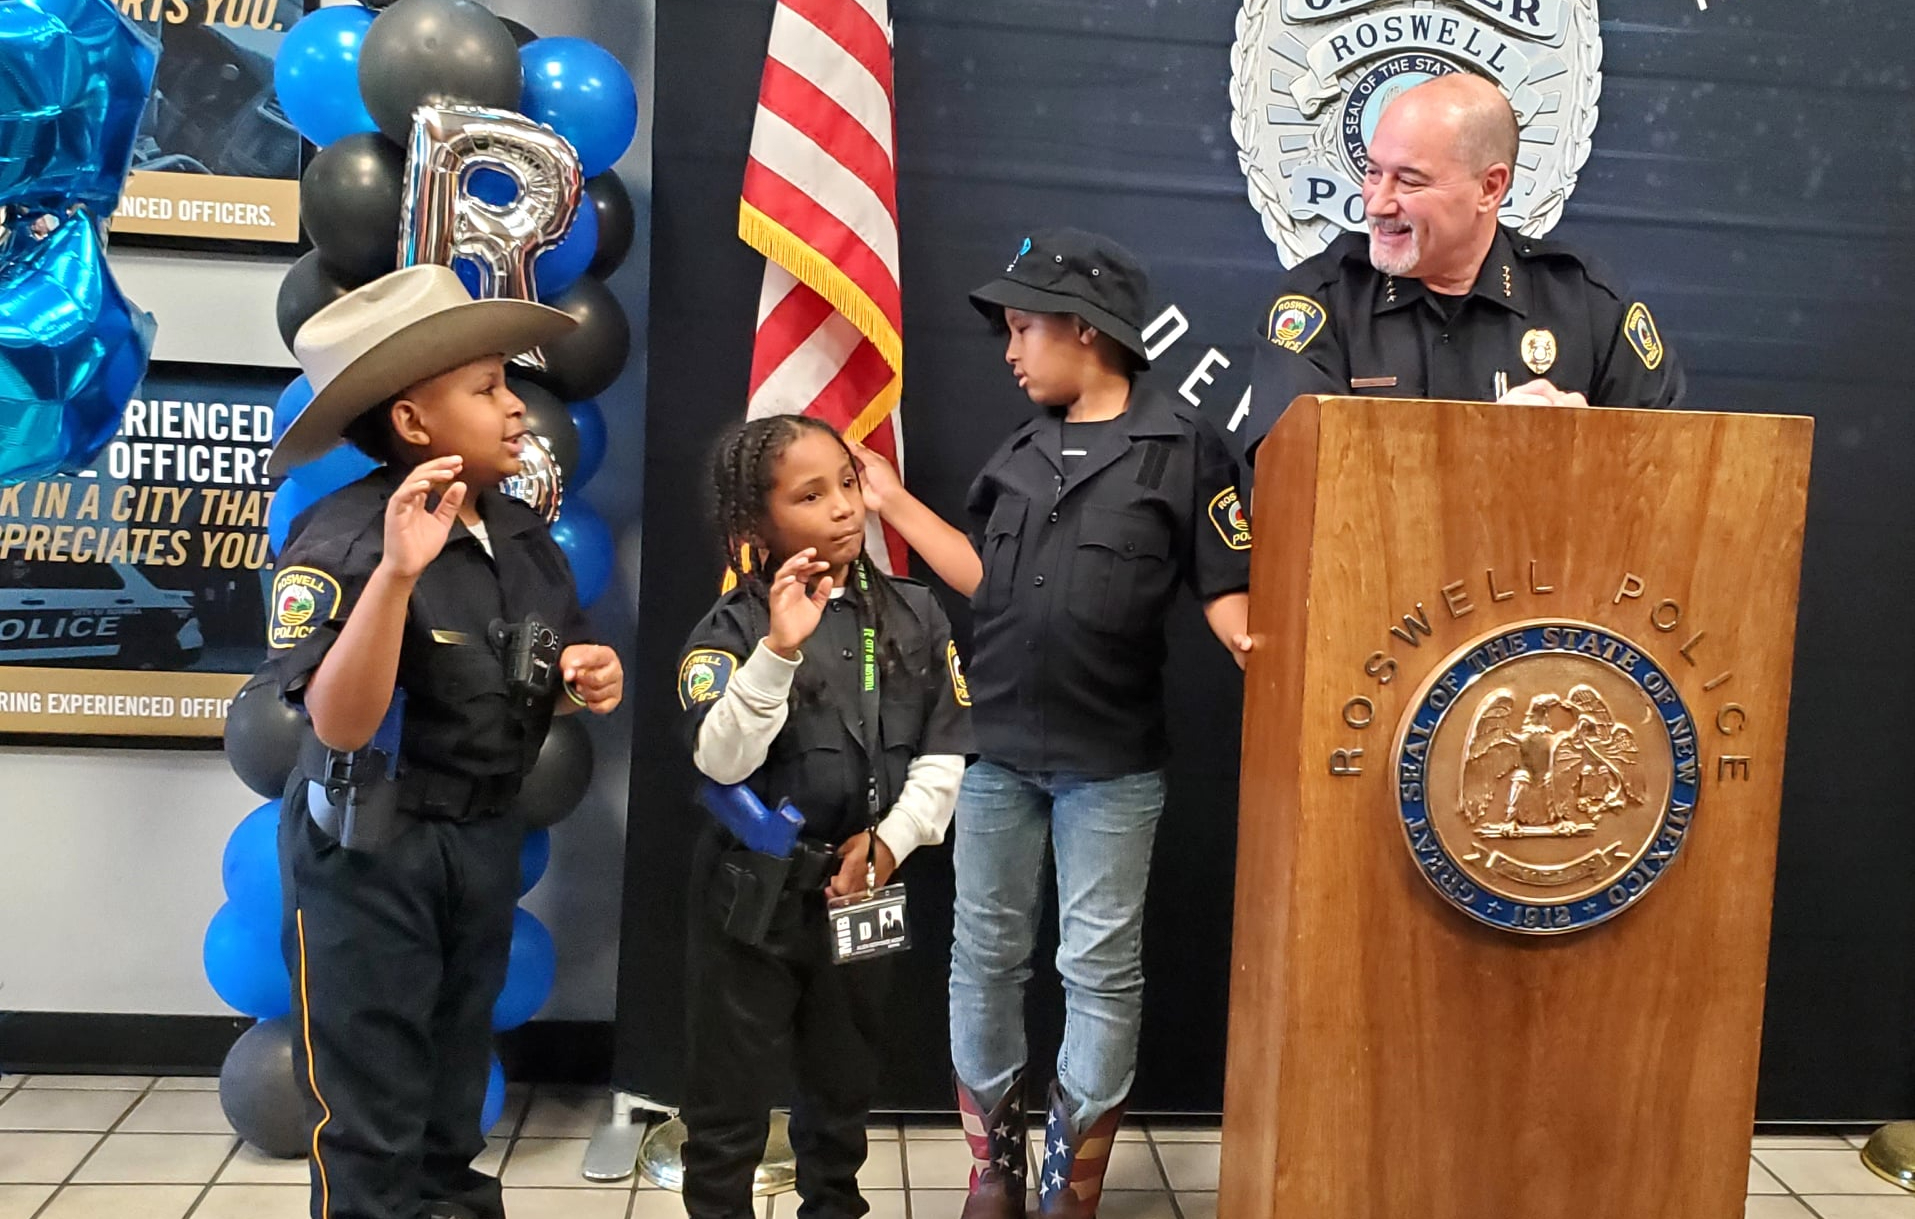 Texas Boy With Terminal Cancer Who Dreams of Joining Police Sworn In As